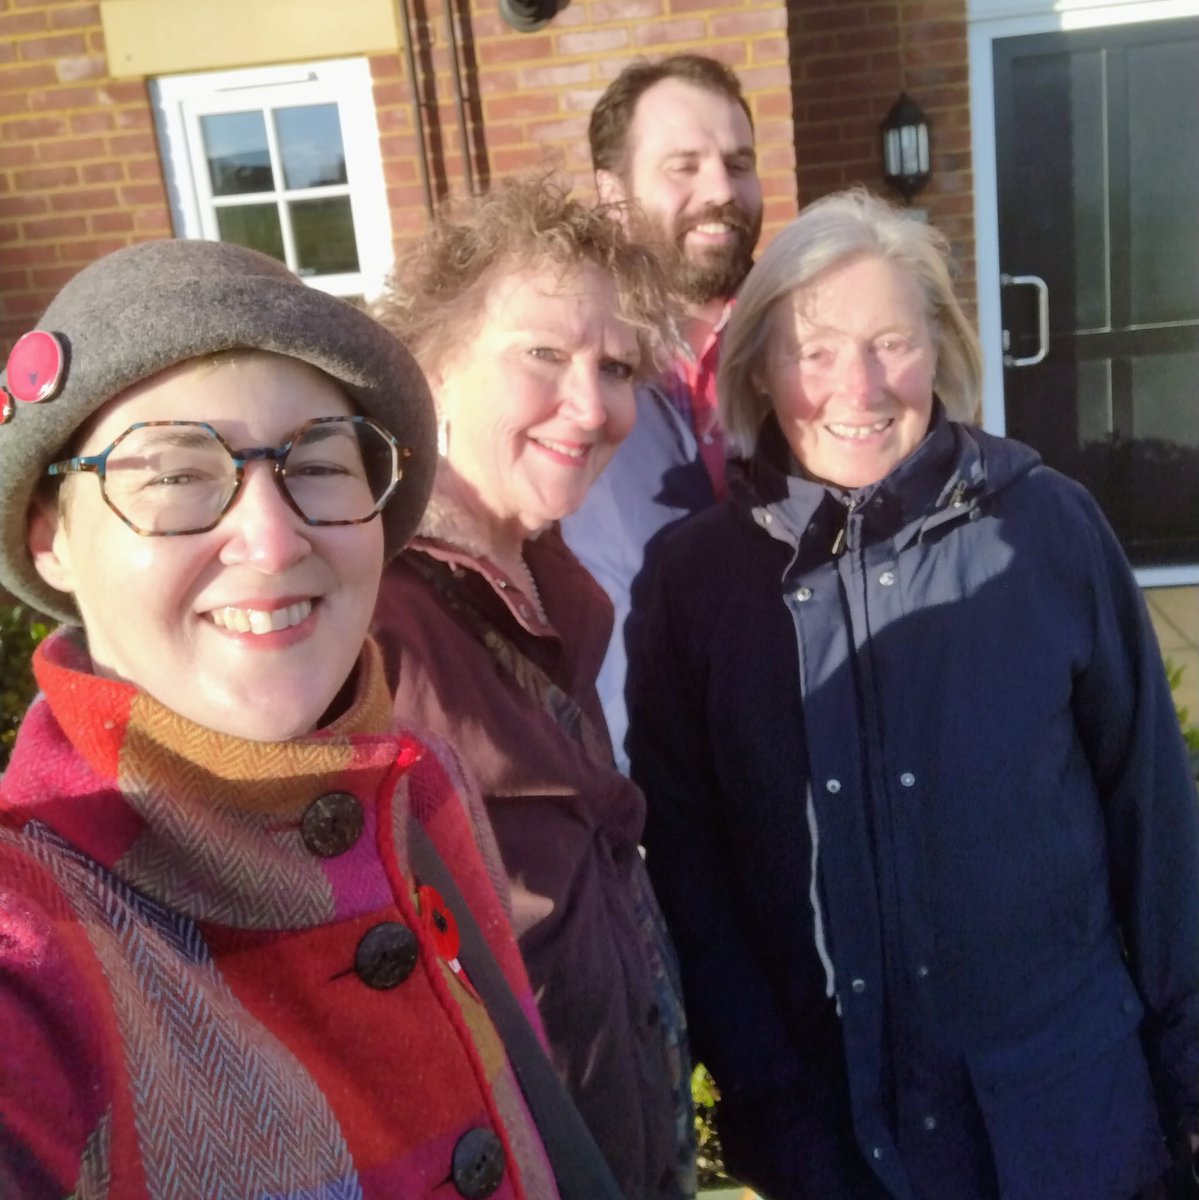 Lot of support for Dr Kerrie Thornhill, Labour Party Candidate for Hardwick this evening. Previous Conservative voters unimpressed by Liz Truss return to the limelight. #LabourDoorstep